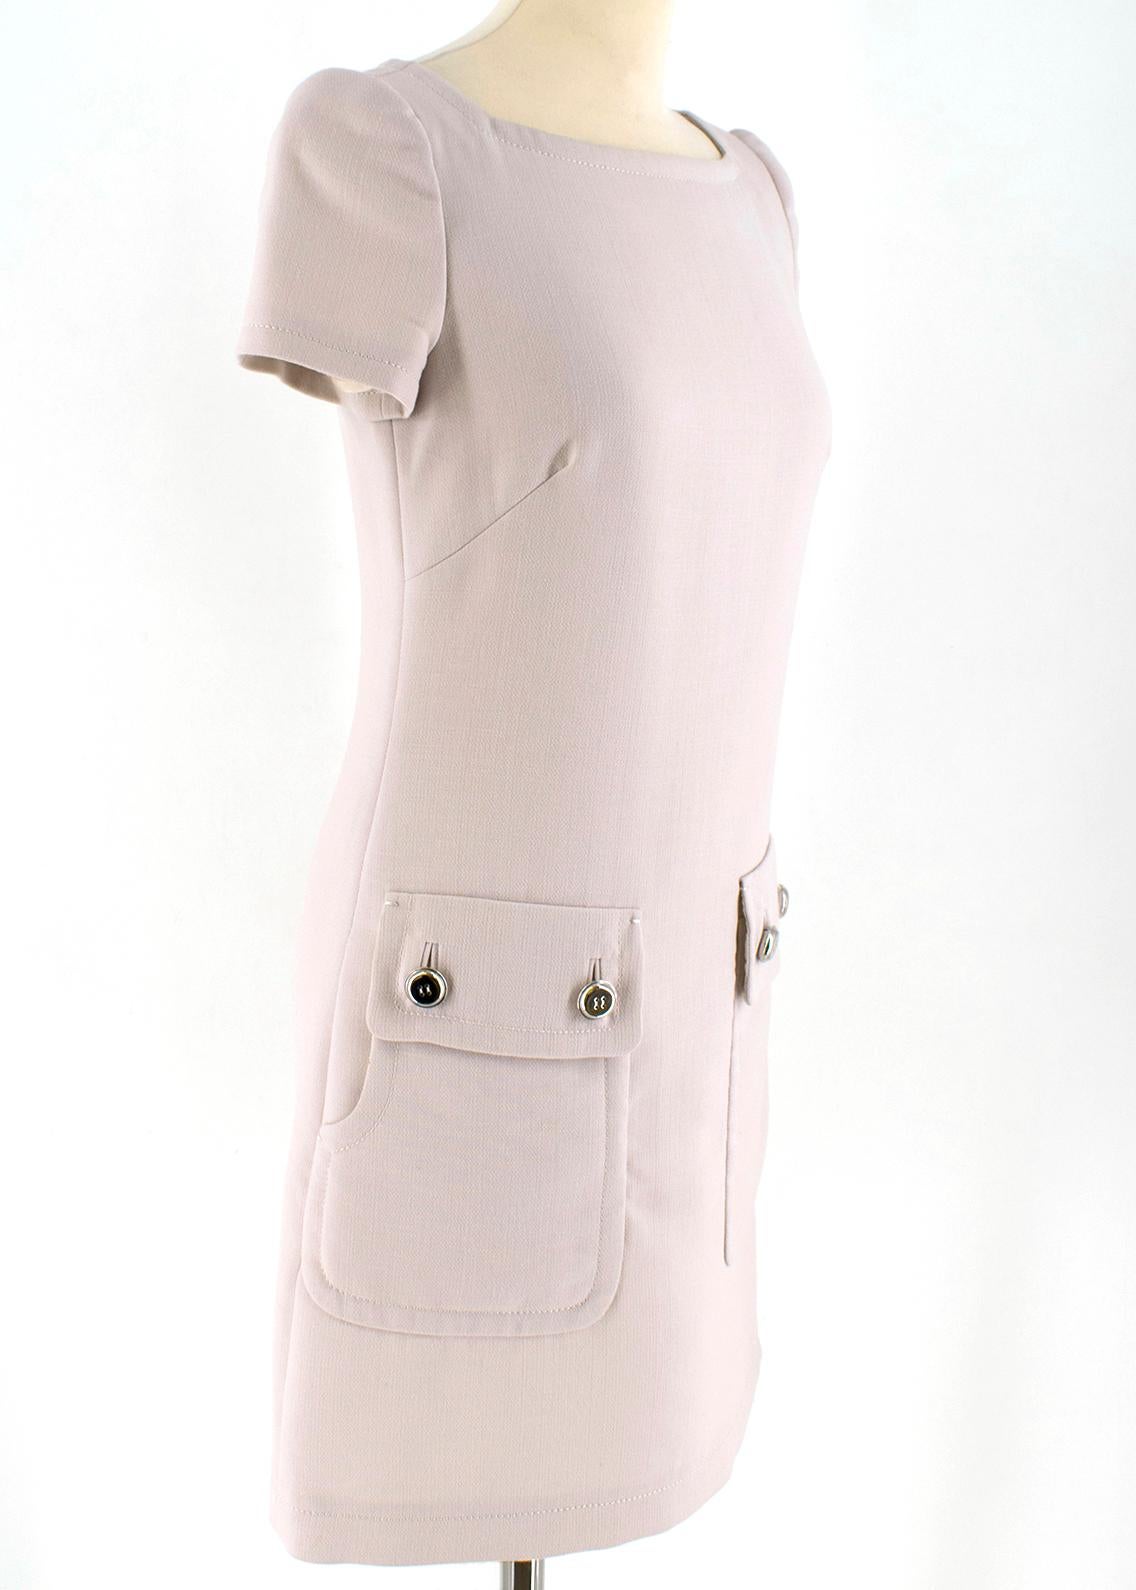 Prada Square-Neck Beige Shift Dress

Square neck wool-blend cady shift dress
Short sleeved
Bust darts
Silver-tone buttons 
Two exterior pockets
Cream interior lining

Please note, these items are pre-owned and may show some signs of storage, even